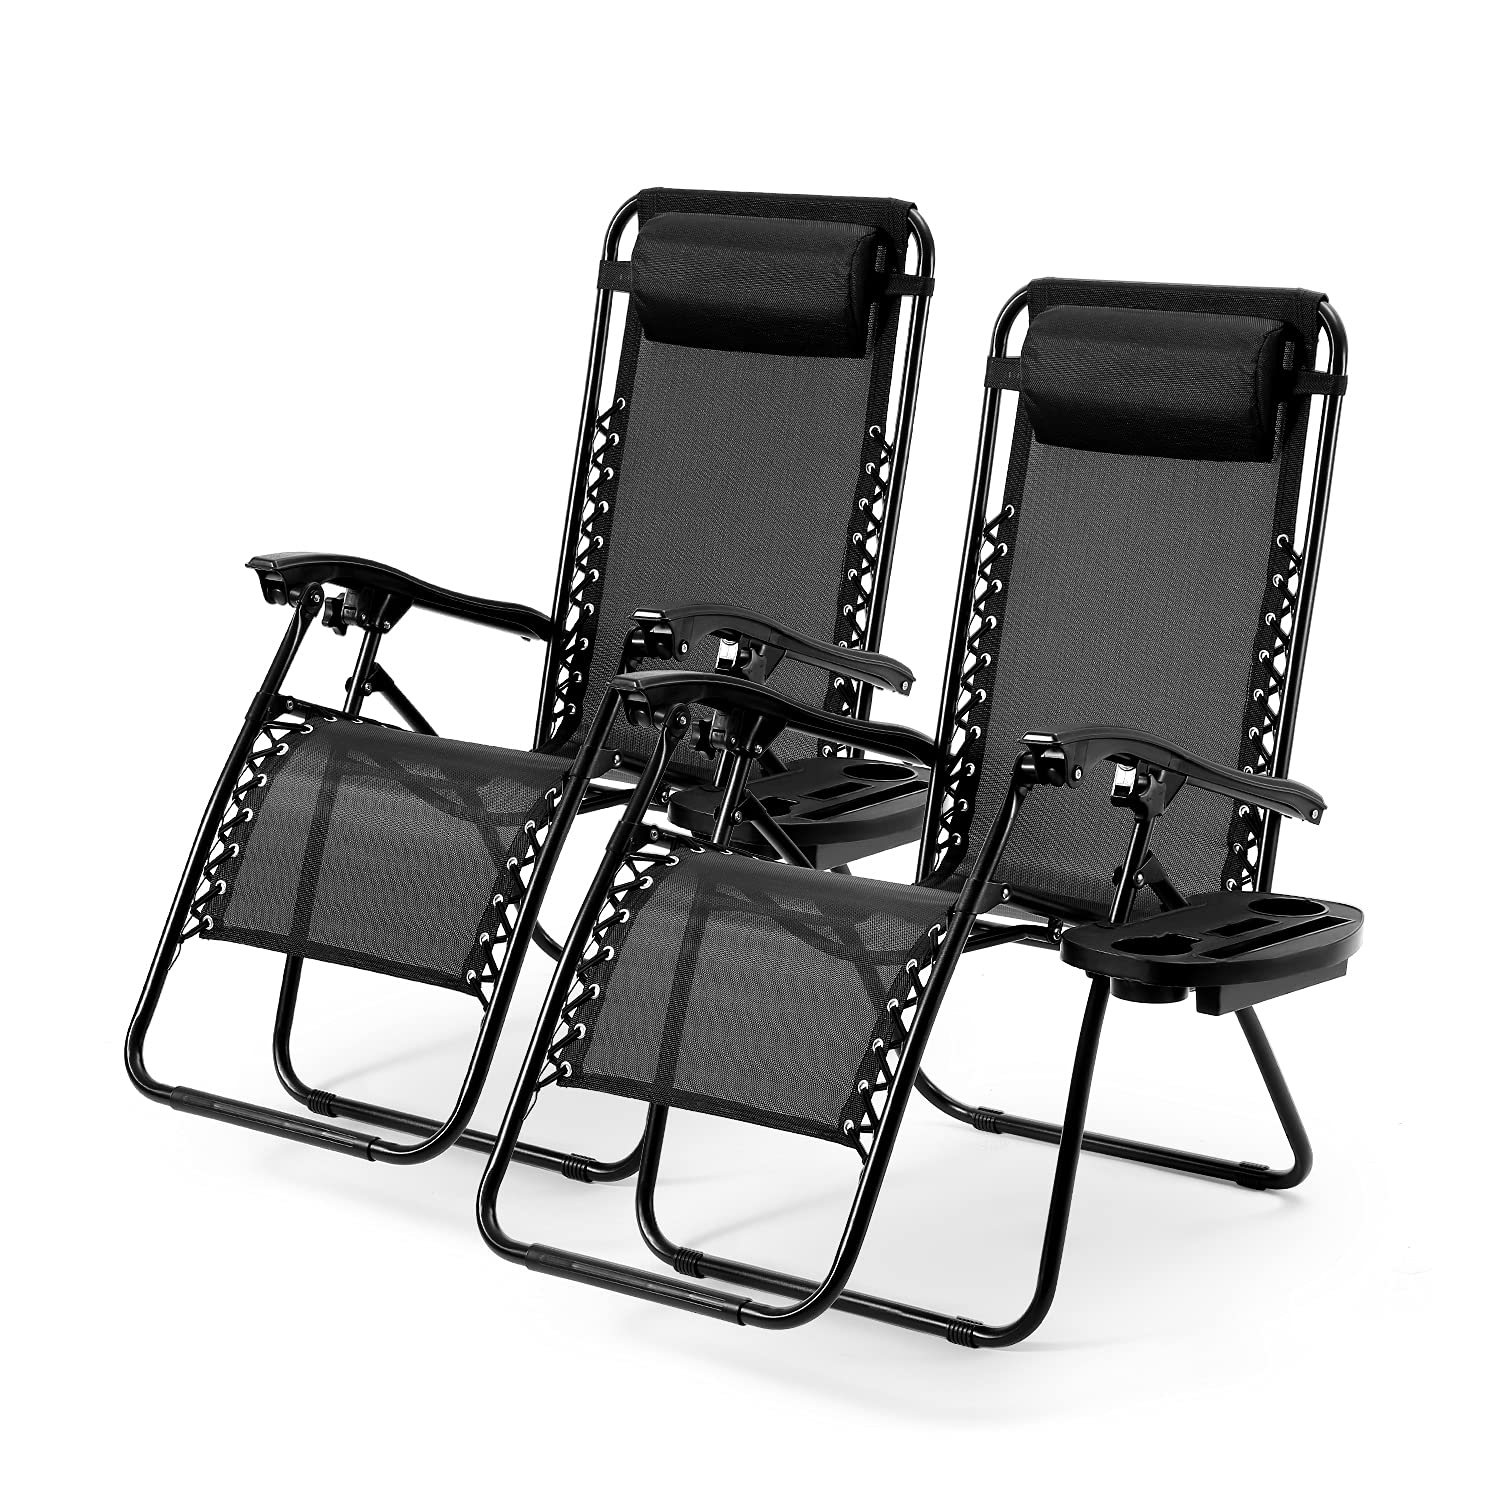 Load image into Gallery viewer, Zero Gravity Chairs Patio Chairs Set of 2 Reclining Beach Chair Adjustable Steel Mesh Zero Gravity Lounge Chair Recliners w/Pillows and Cup Holder Trays for Poolside, Backyard, Beach and Camping
